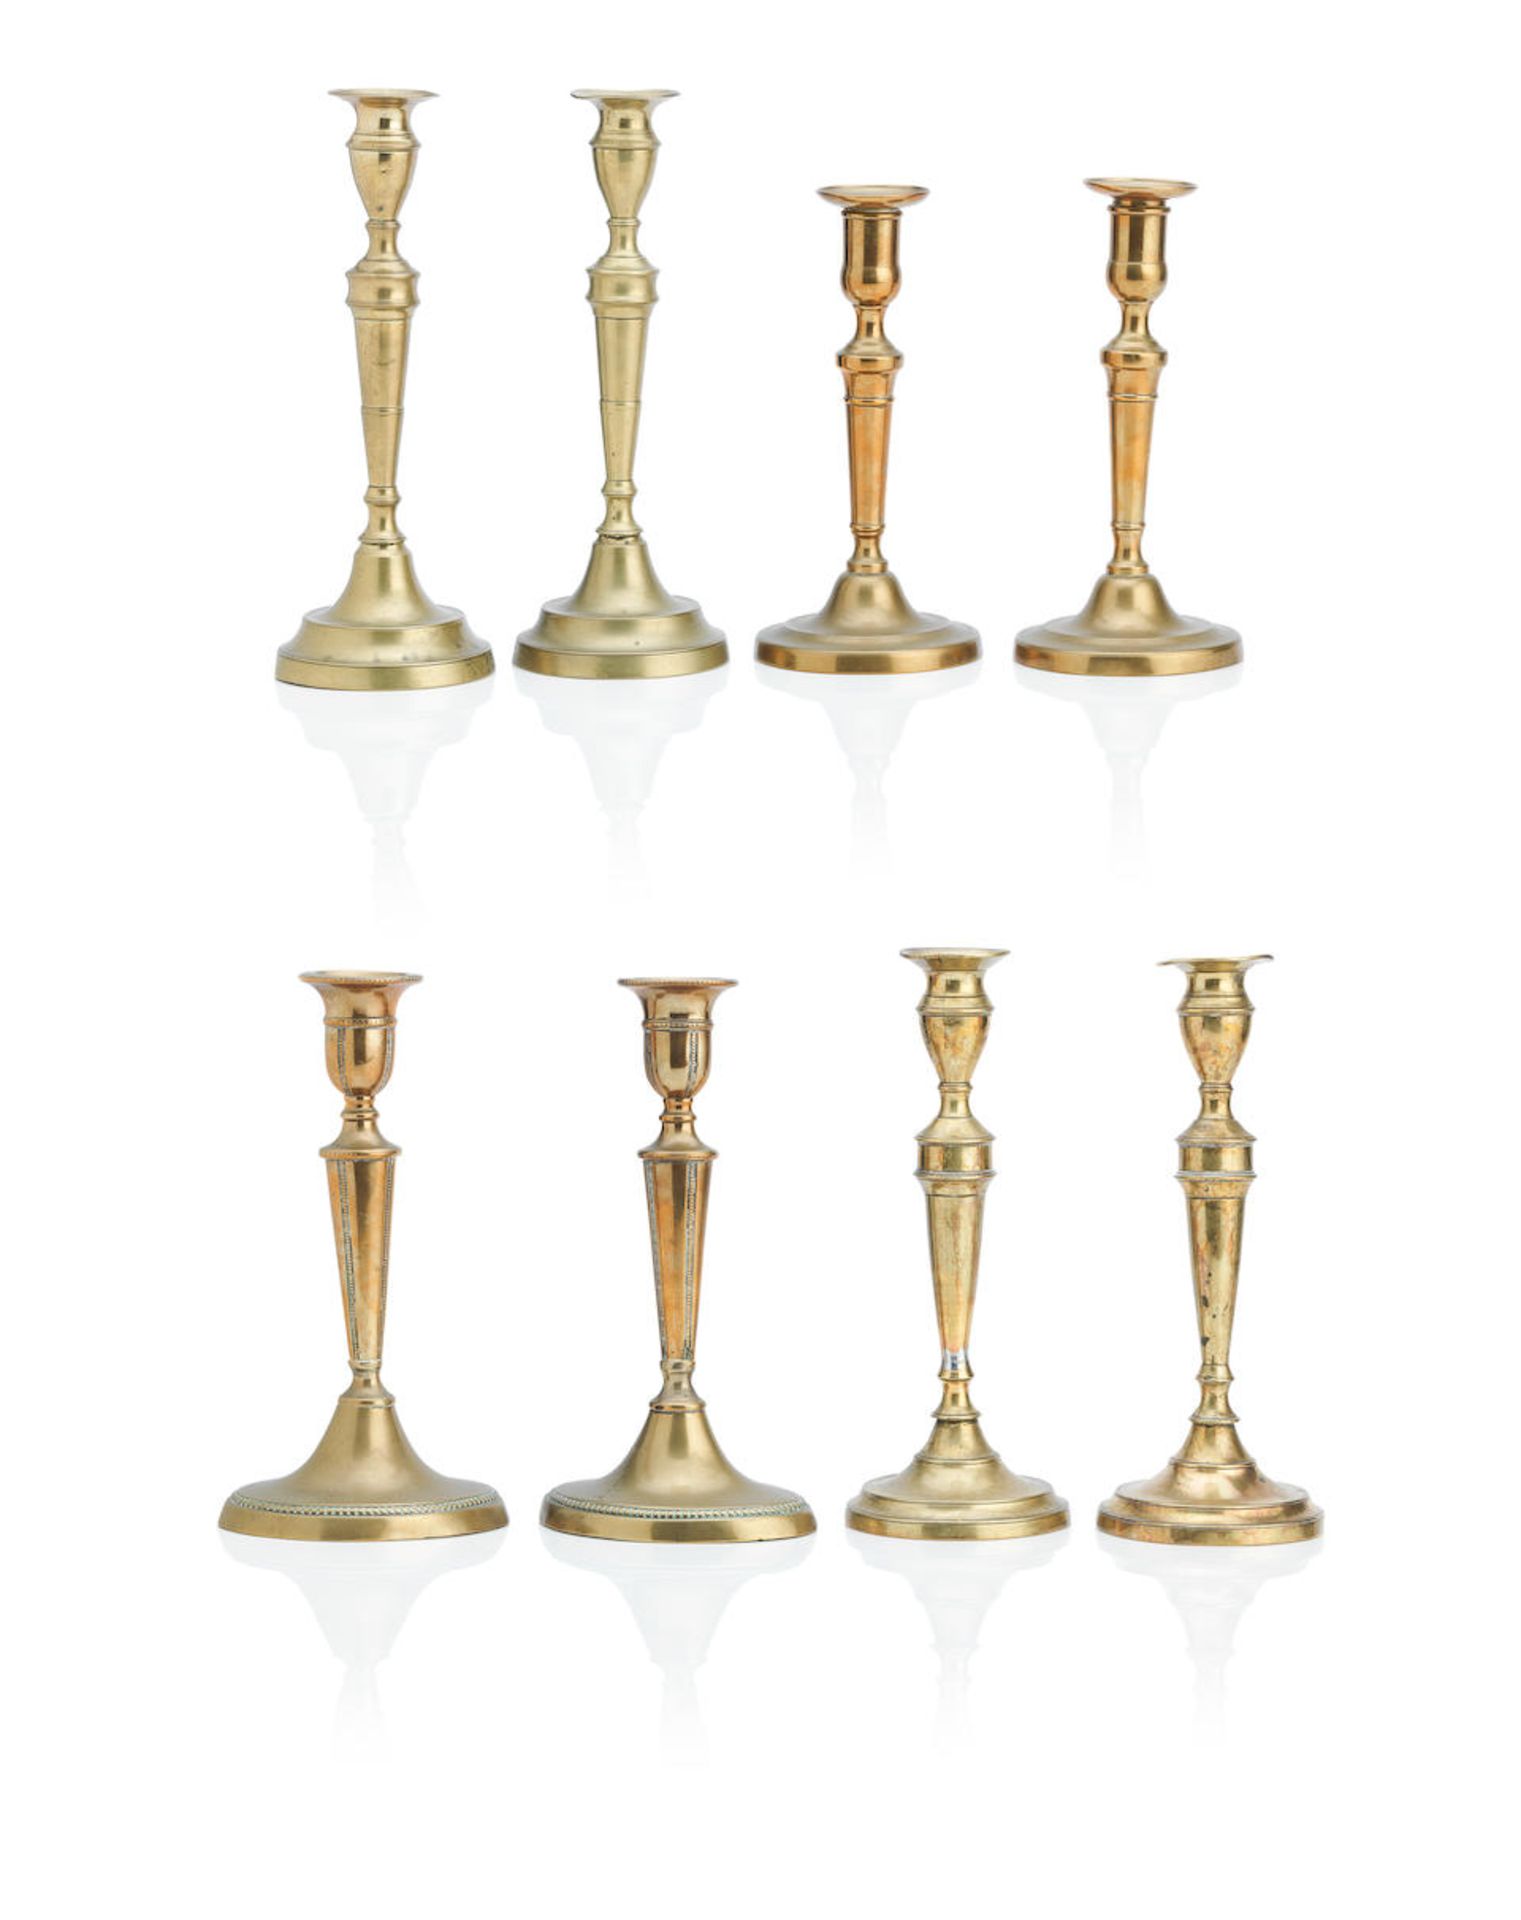 Four pairs of George III copper alloy candlesticks Circa 1780-1820 (8)